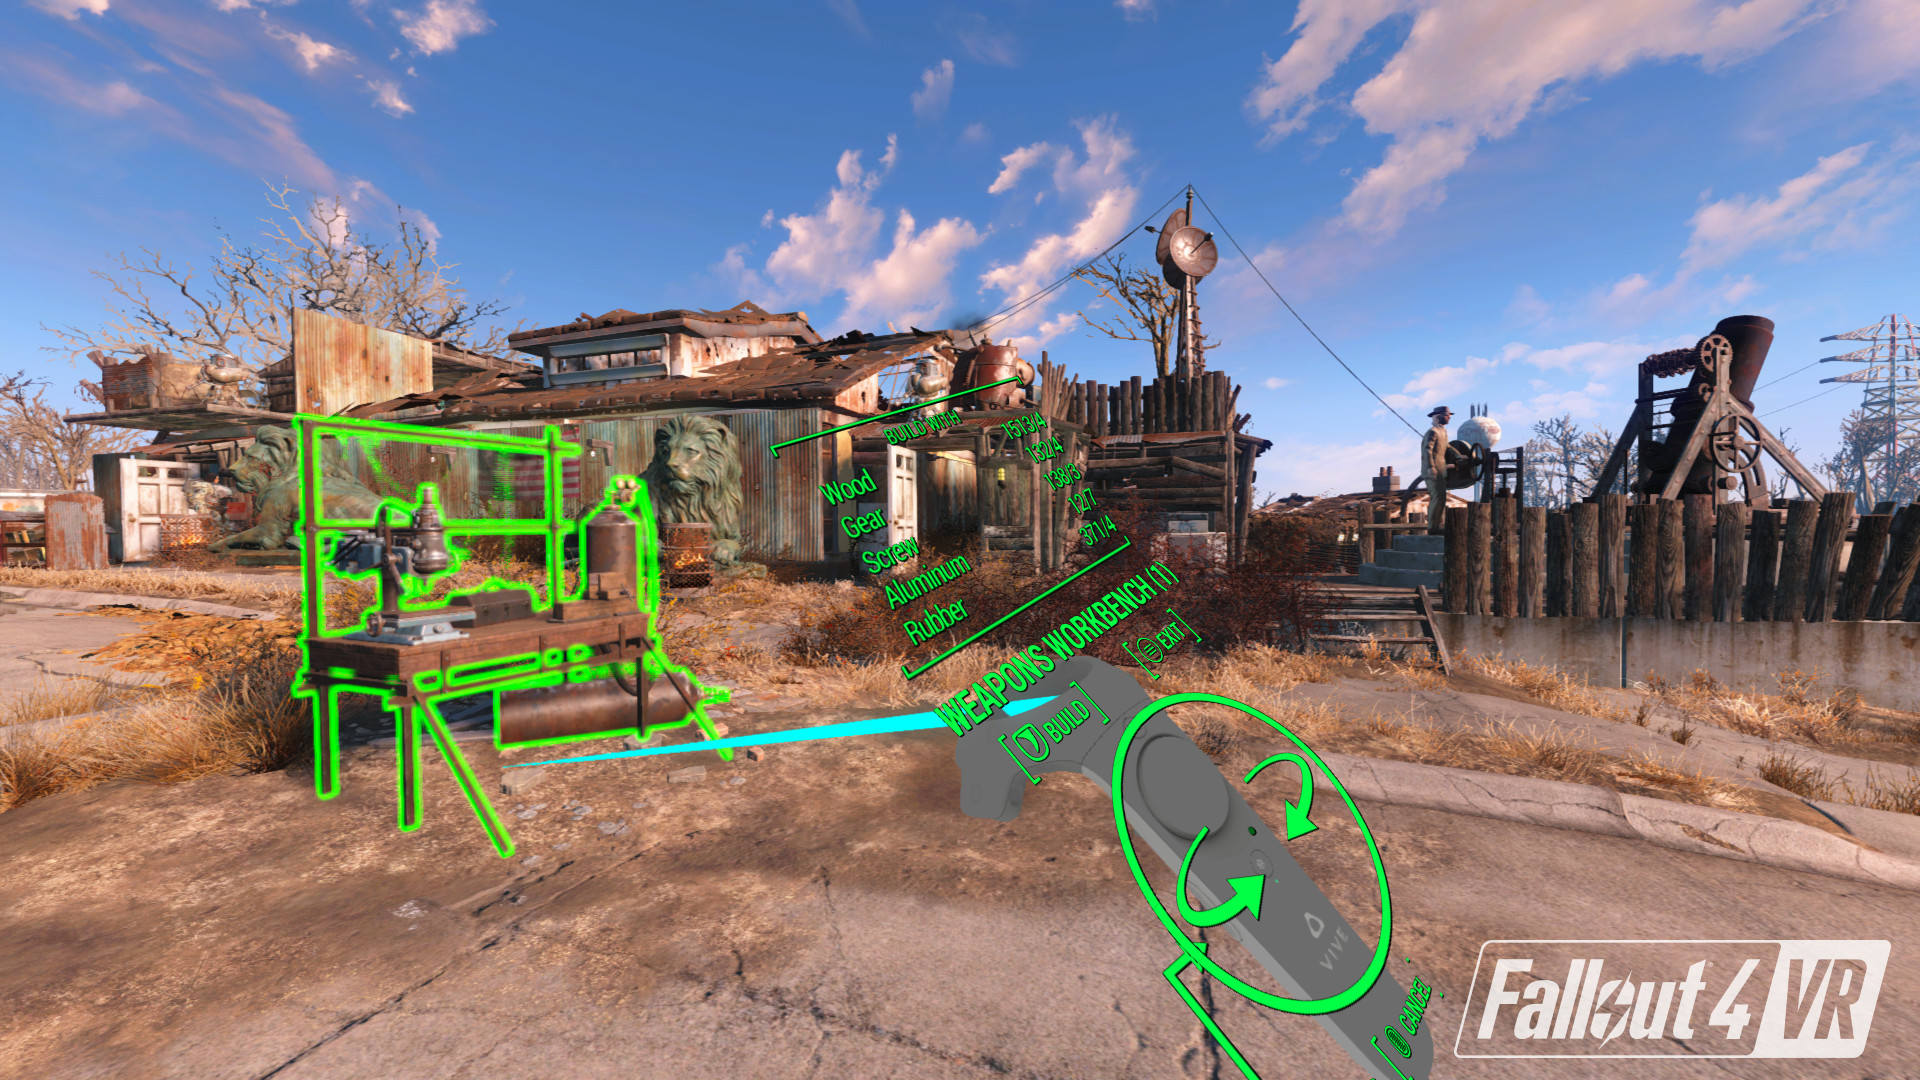 Fallout 4 VR on Steam